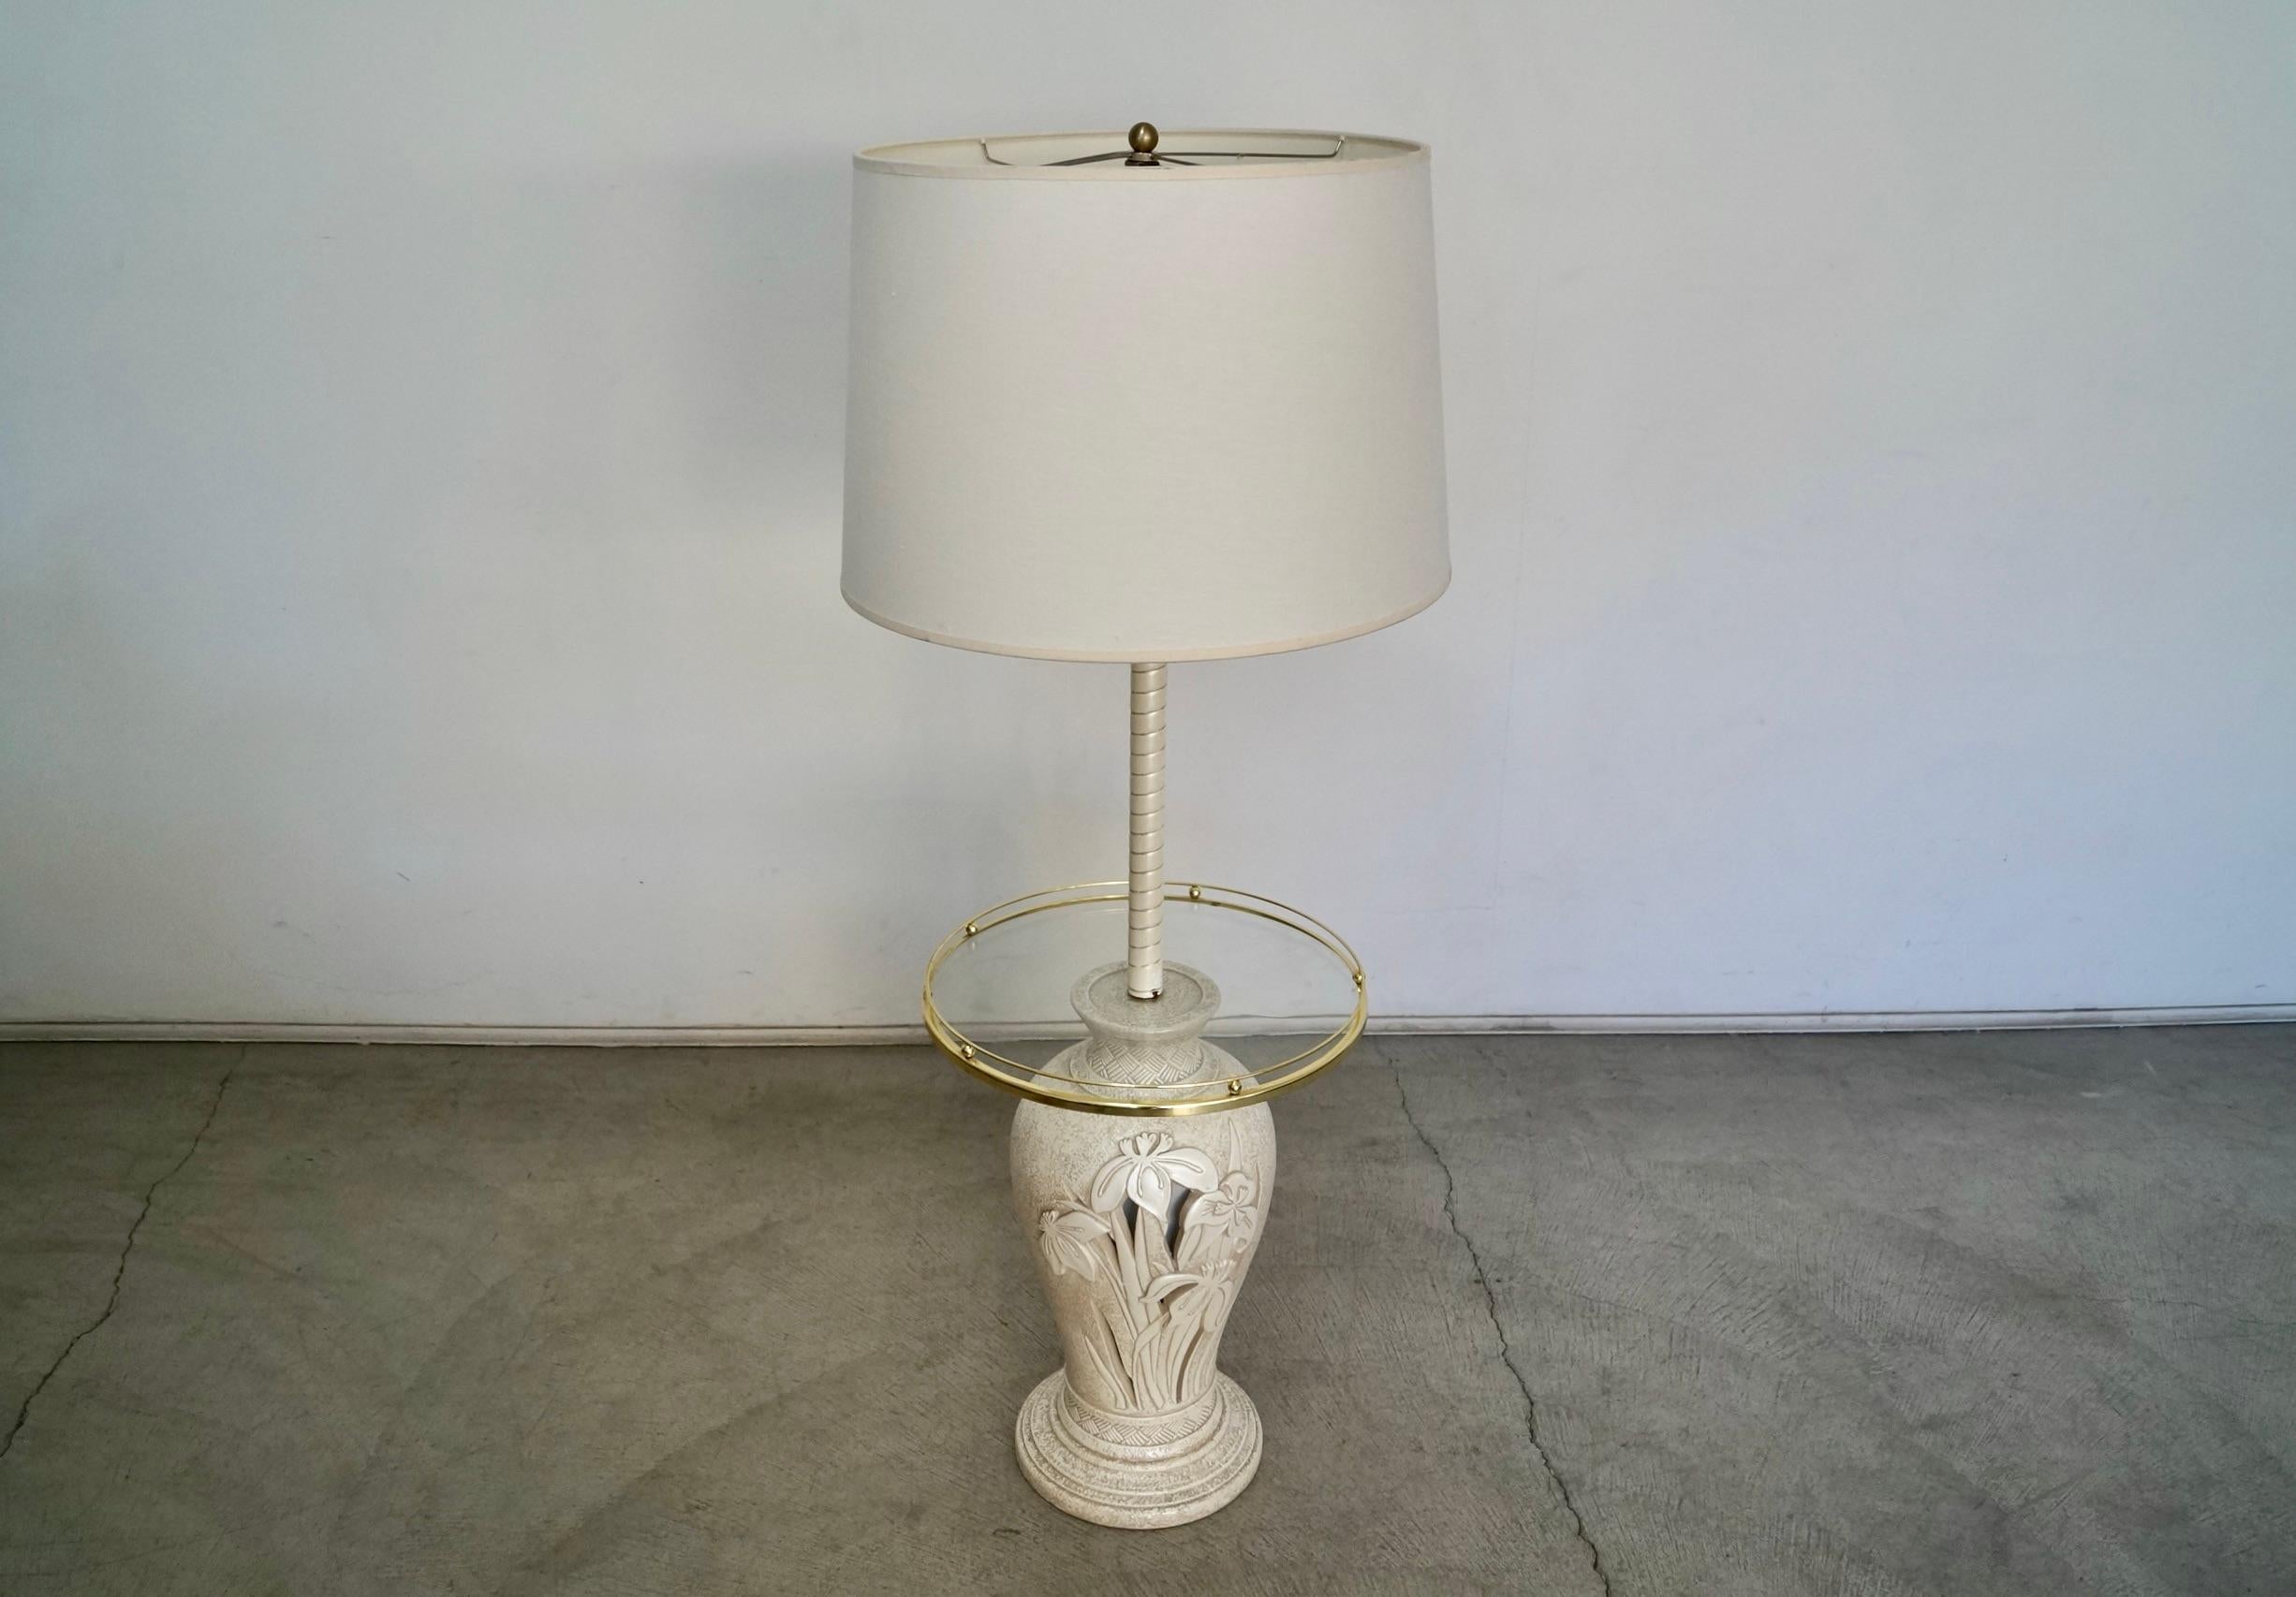 Vintage 1970’s Hollywood Regency floor lamp with attached side table for sale. In incredible condition, and very beautiful. Made of many different materials. Has a ceramic base with a glass end table and brass tray trim, and a metal pole with a